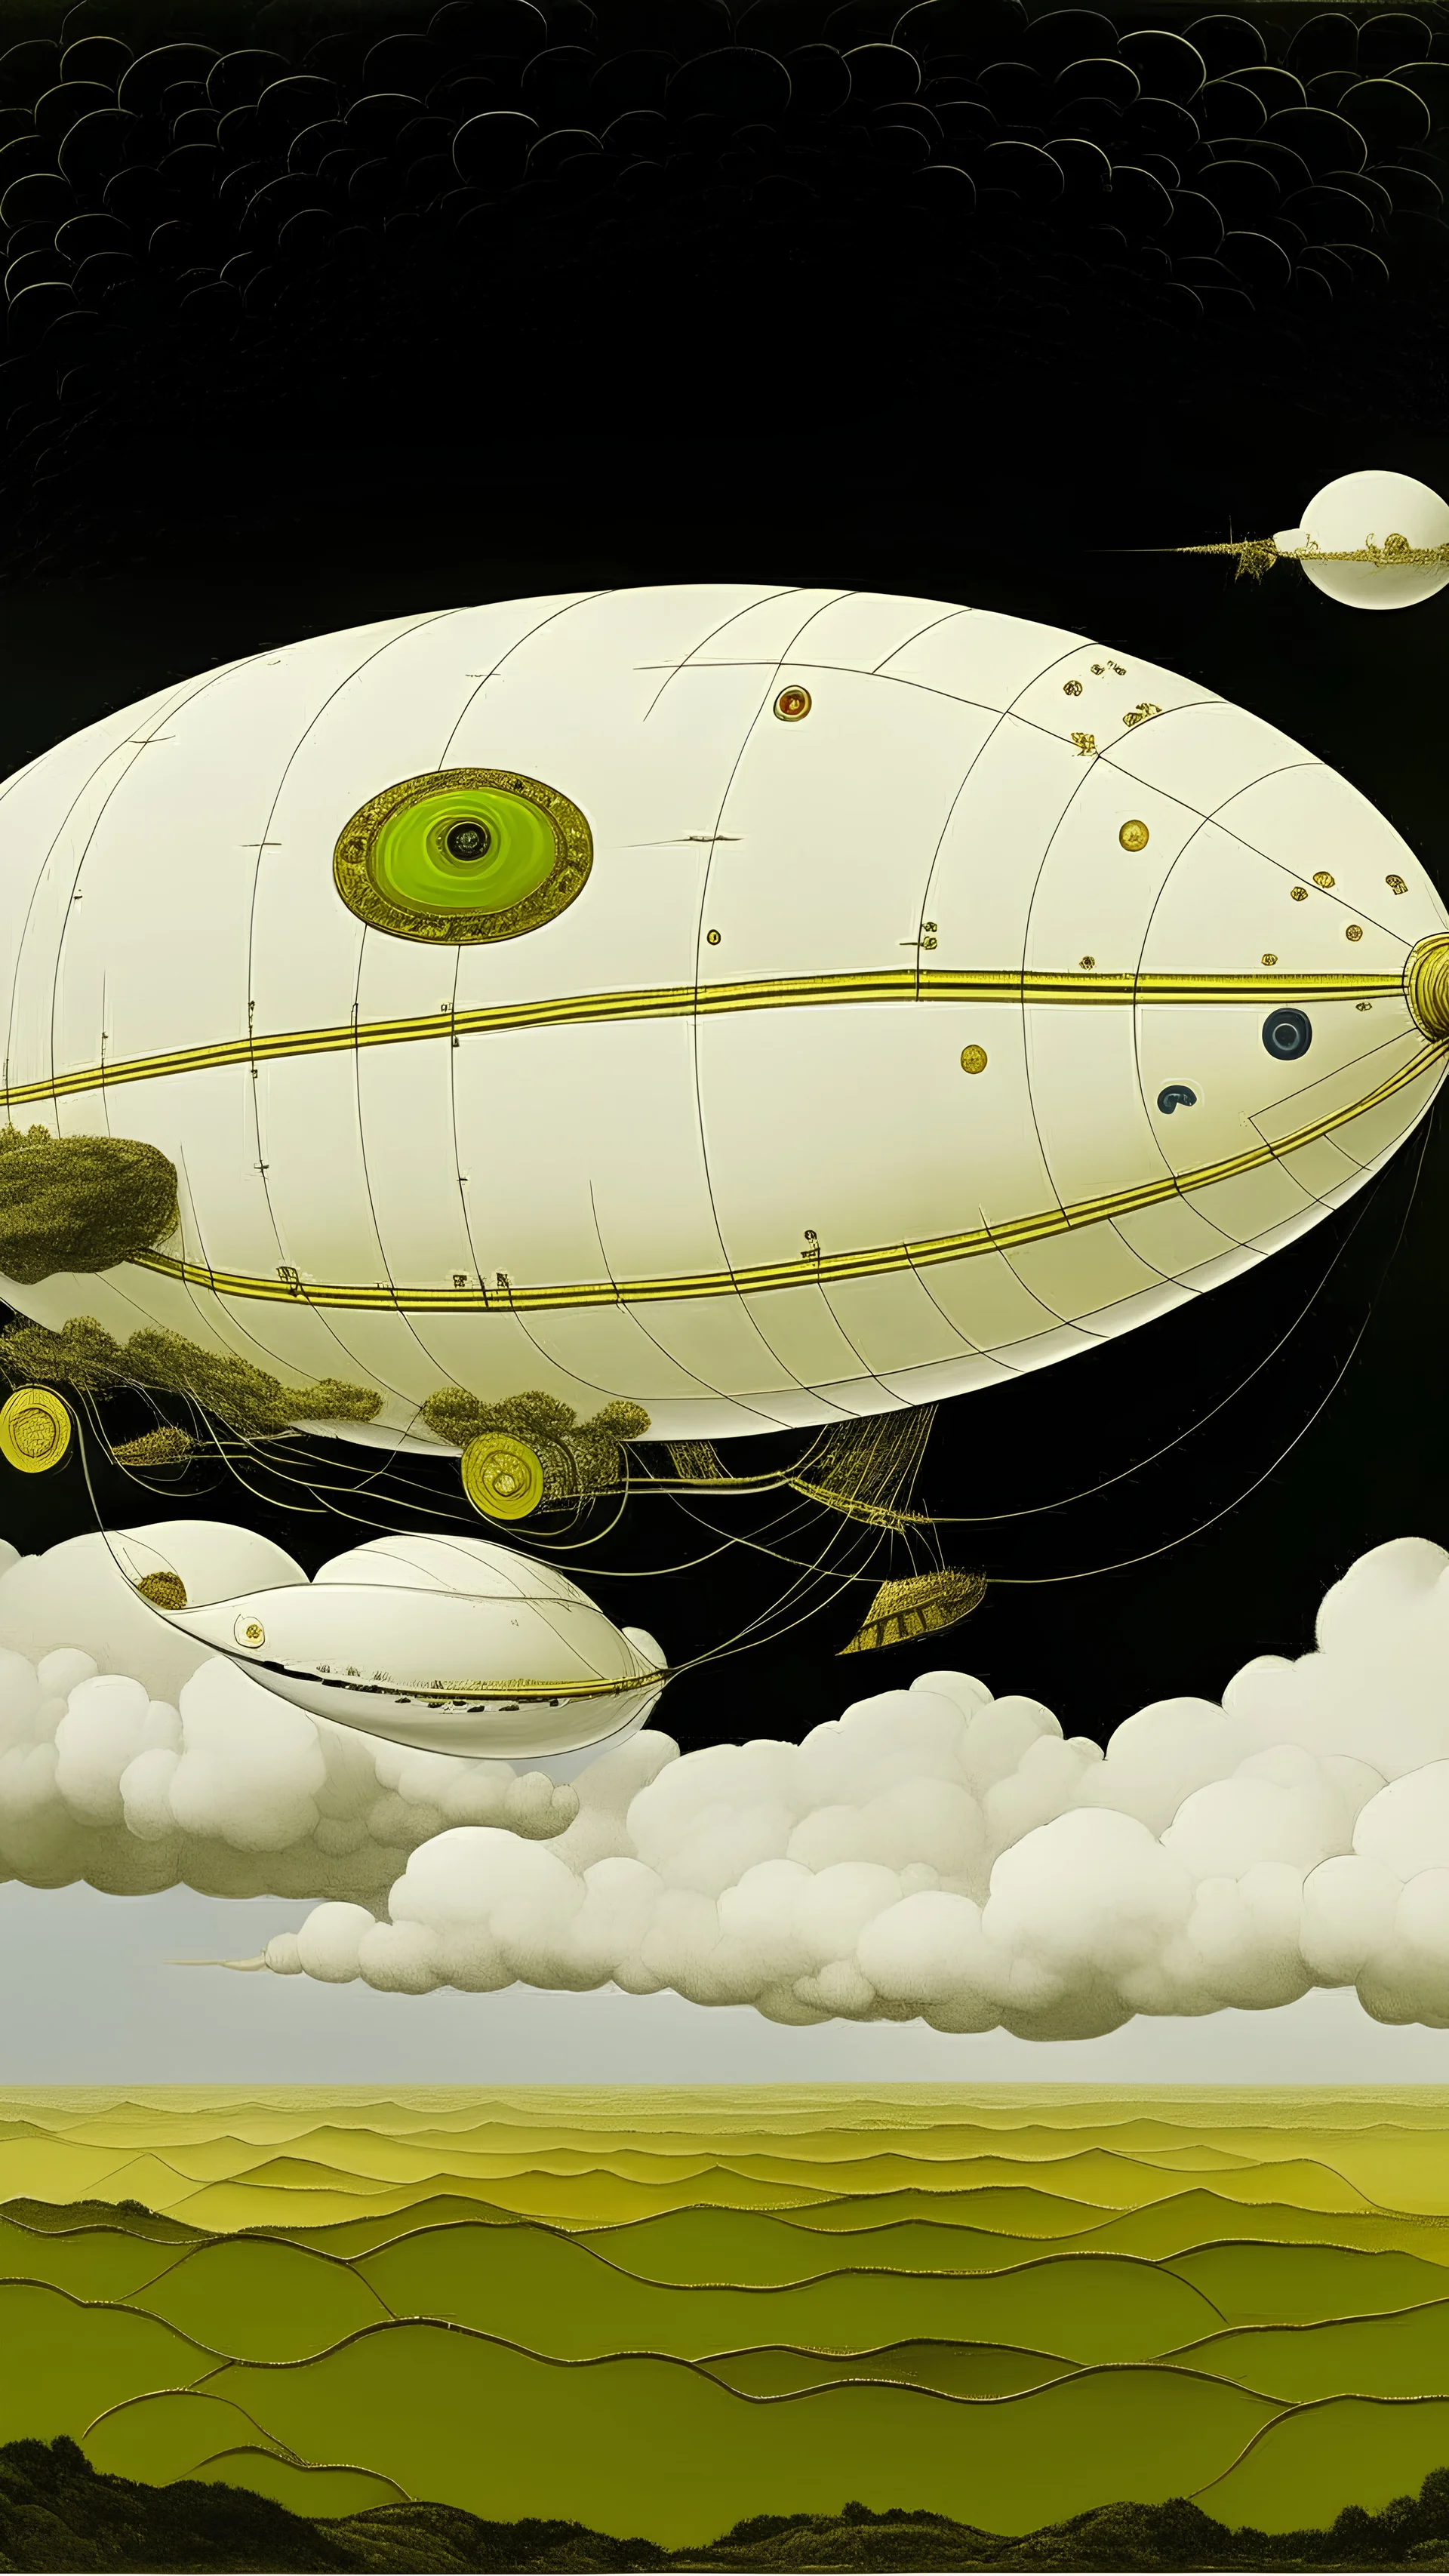 White airships in the clouds painted by Gustav Klimt